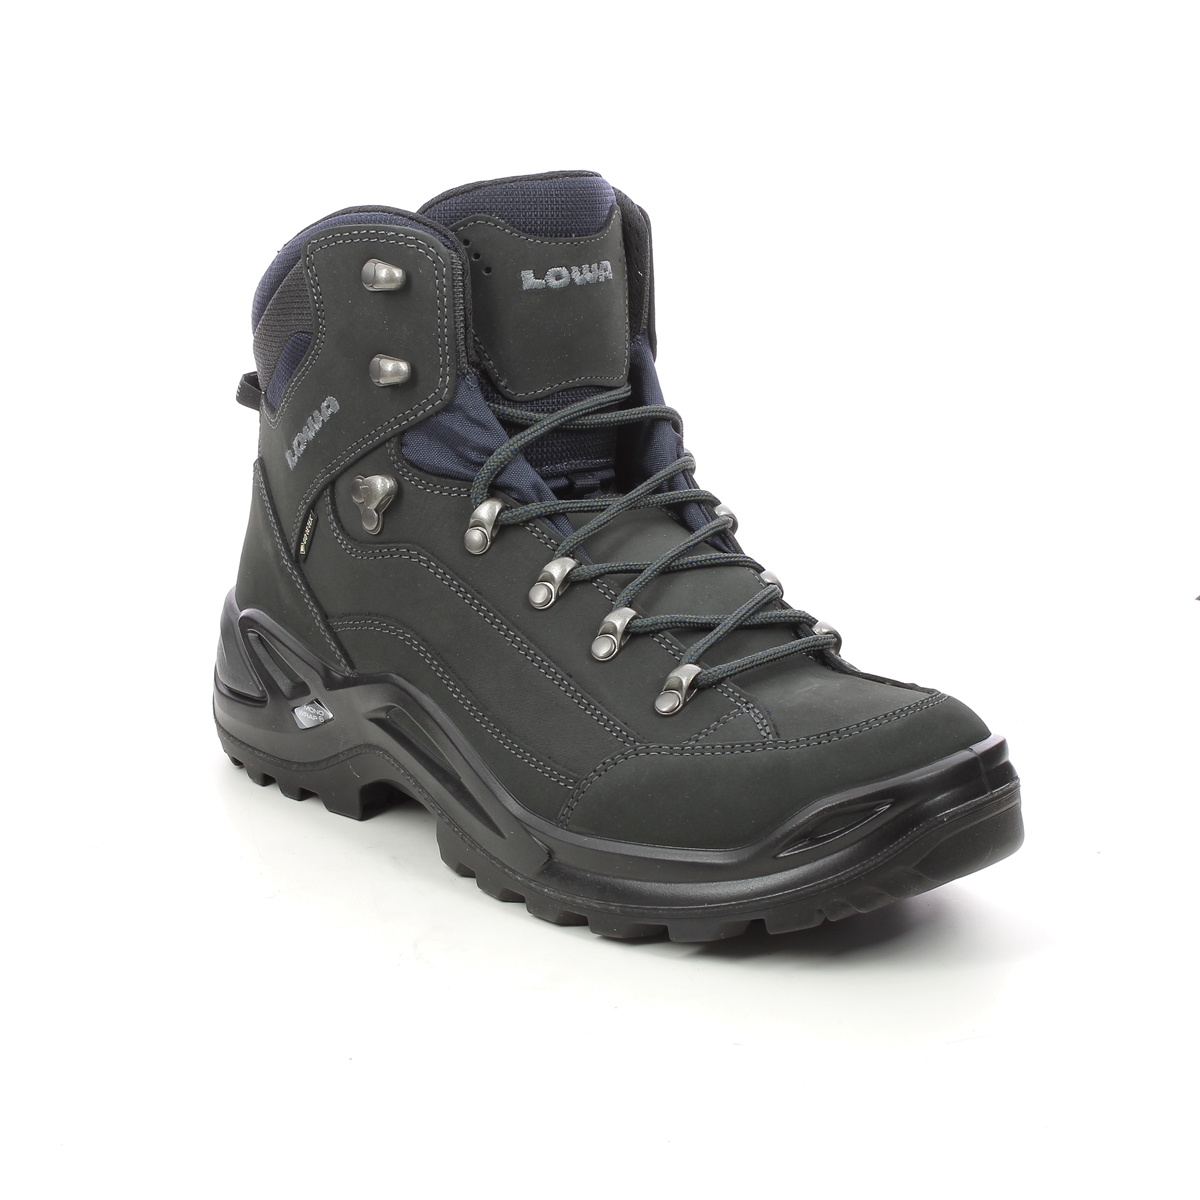 Lowa Renegade Gtx Mid Dark grey nubuck Mens Outdoor Walking Boots 310945-0954 in a Plain Leather in Size 12